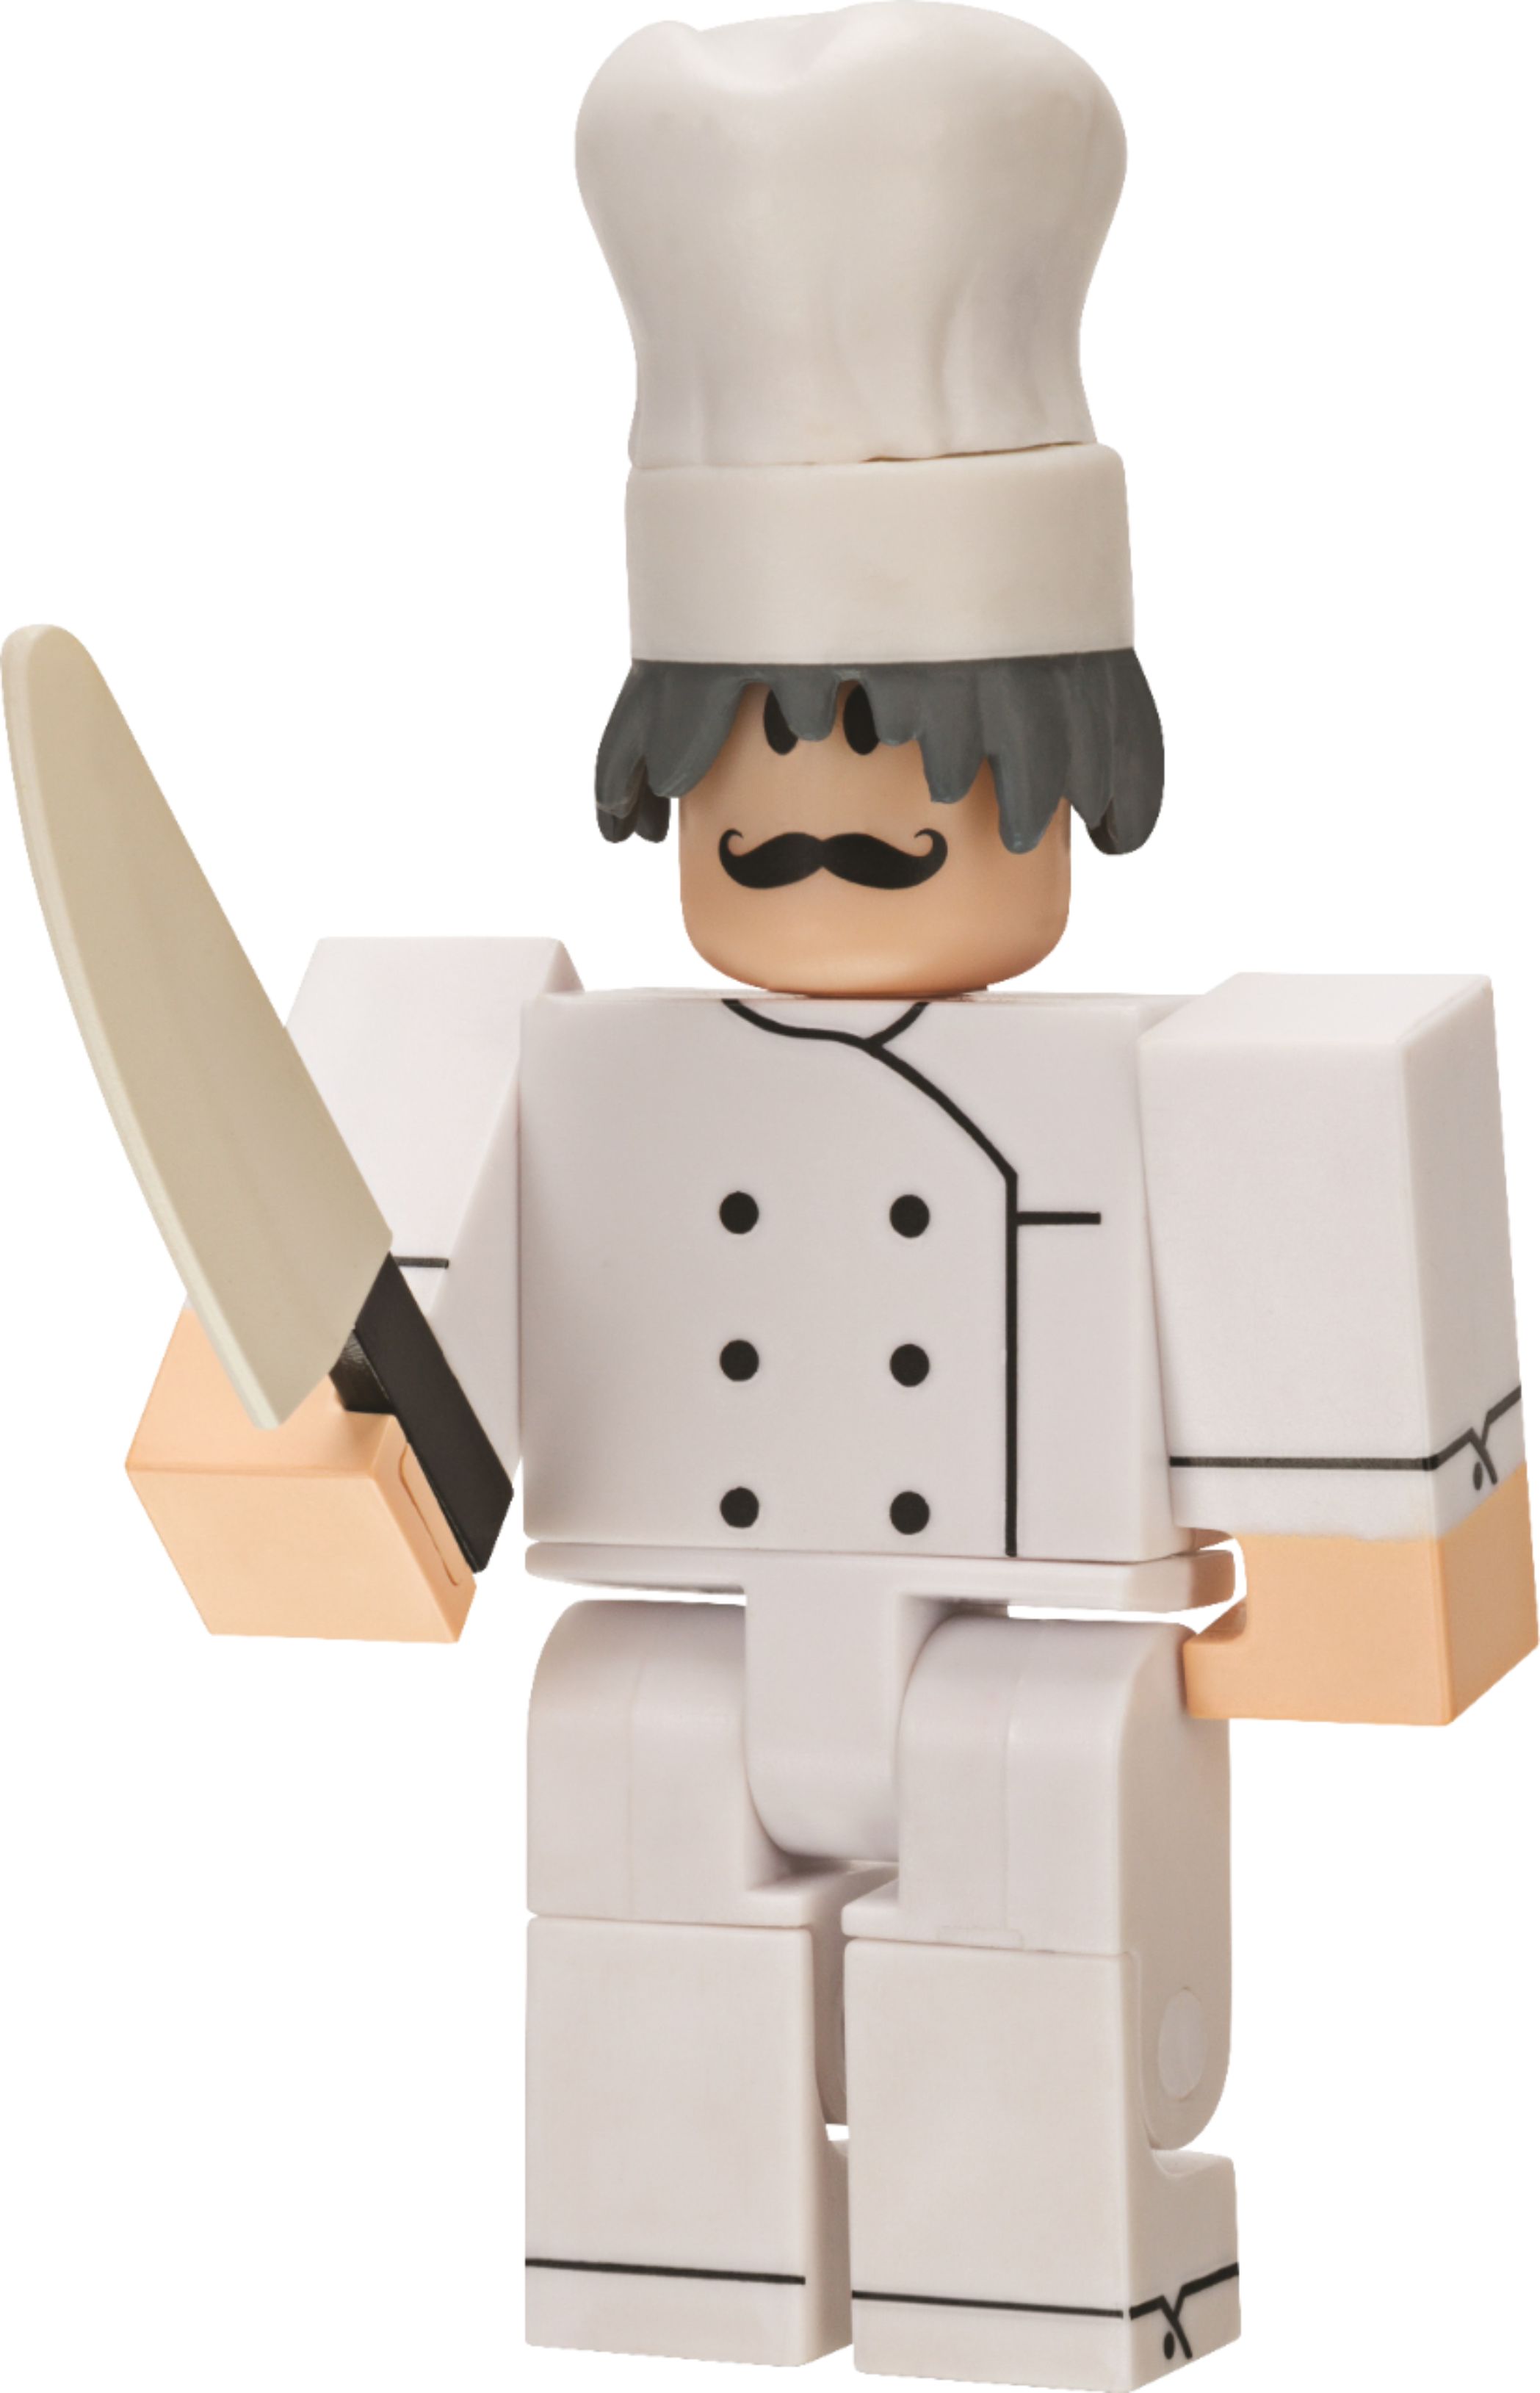 Roblox Series 6 Mystery Figure Styles May Vary Rob0173 Best Buy - roblox cardboard robot with knife